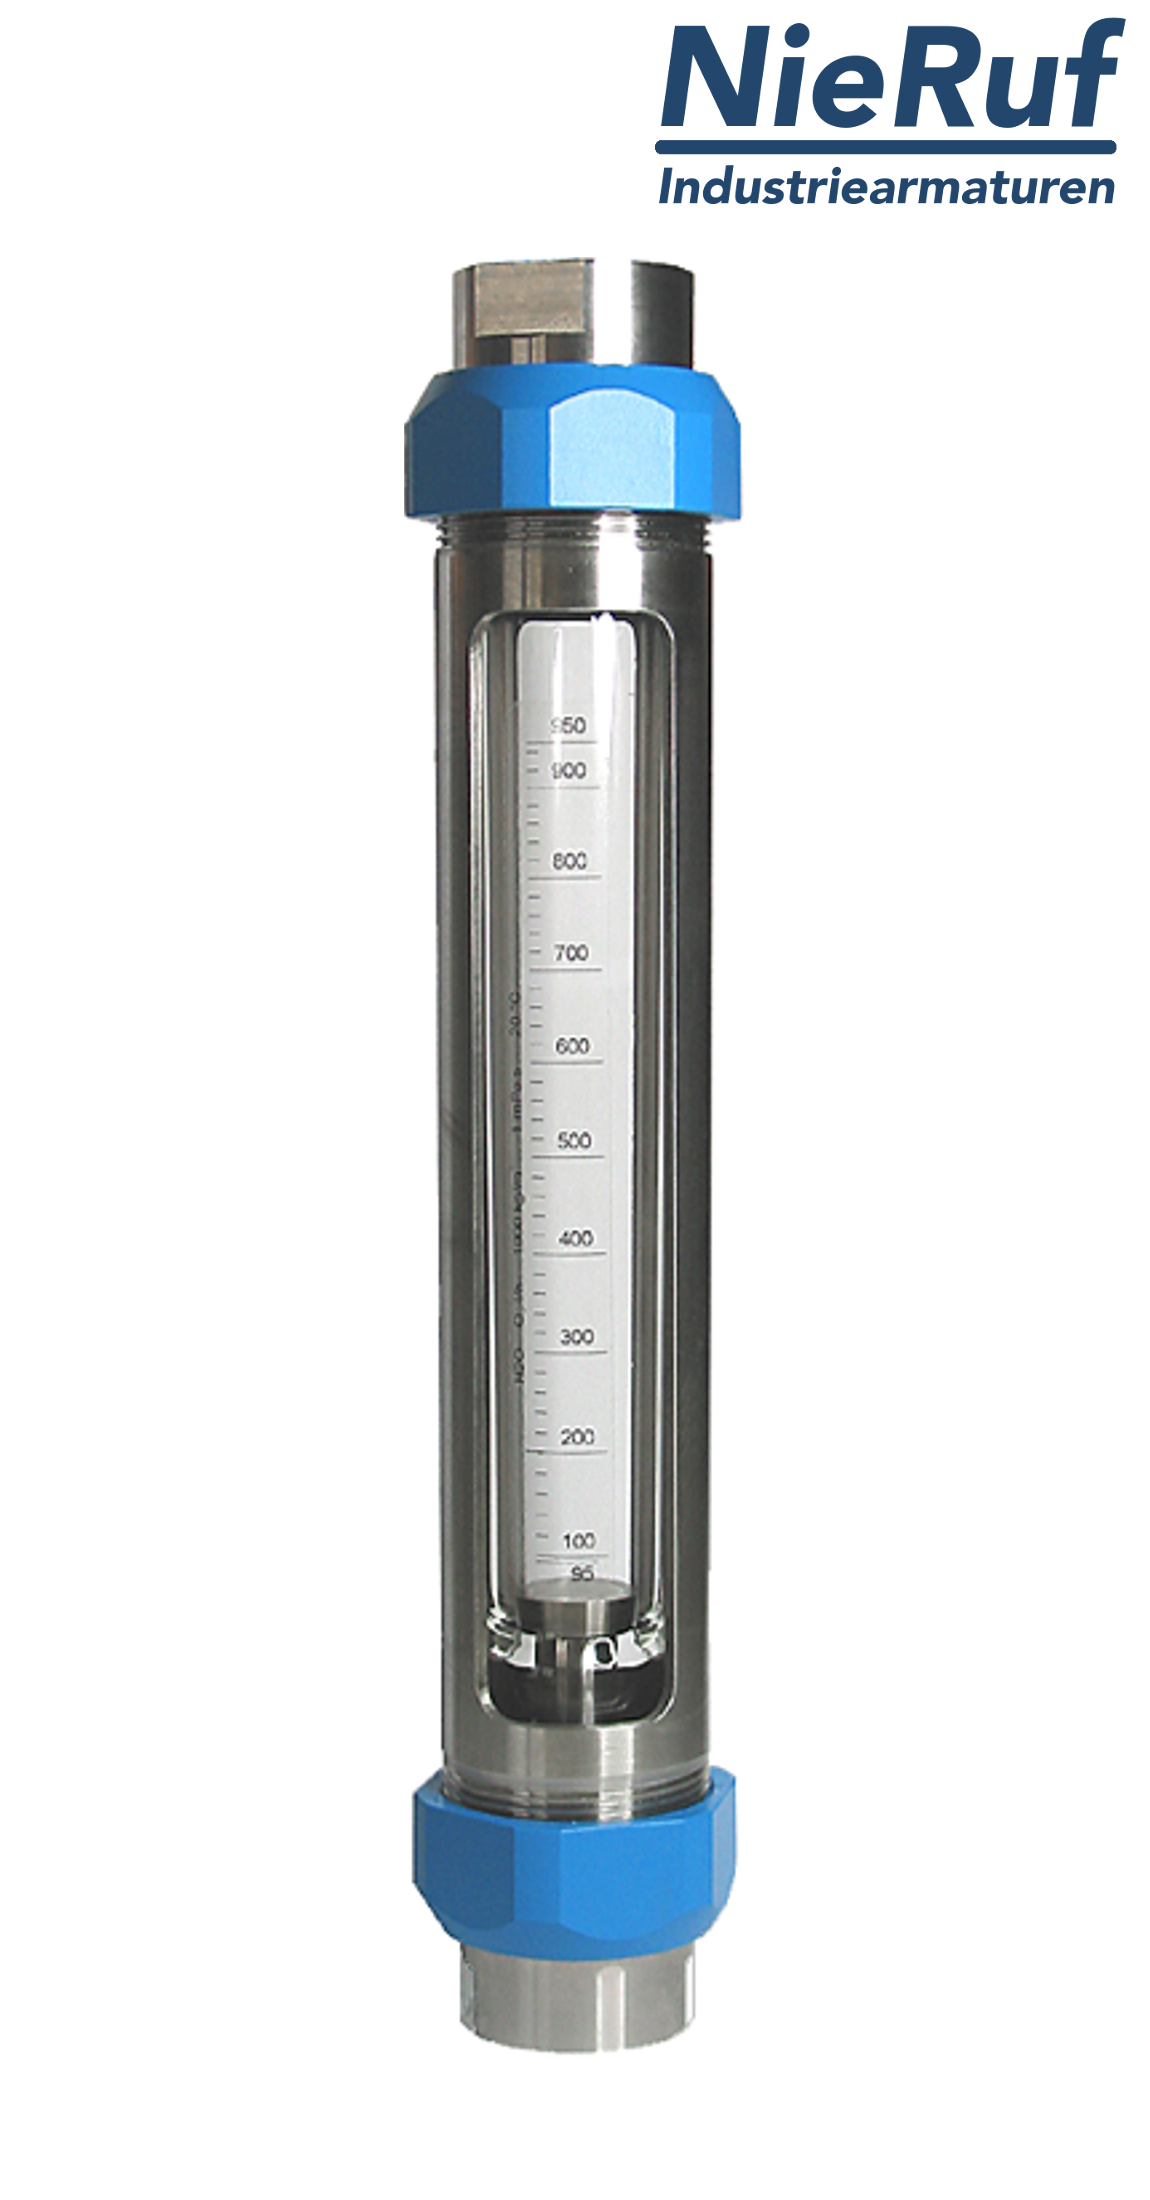 Variable area flowmeter stainless steel + borosilicate 1 1/4" inch 800.0 - 8000 l/h water FKM